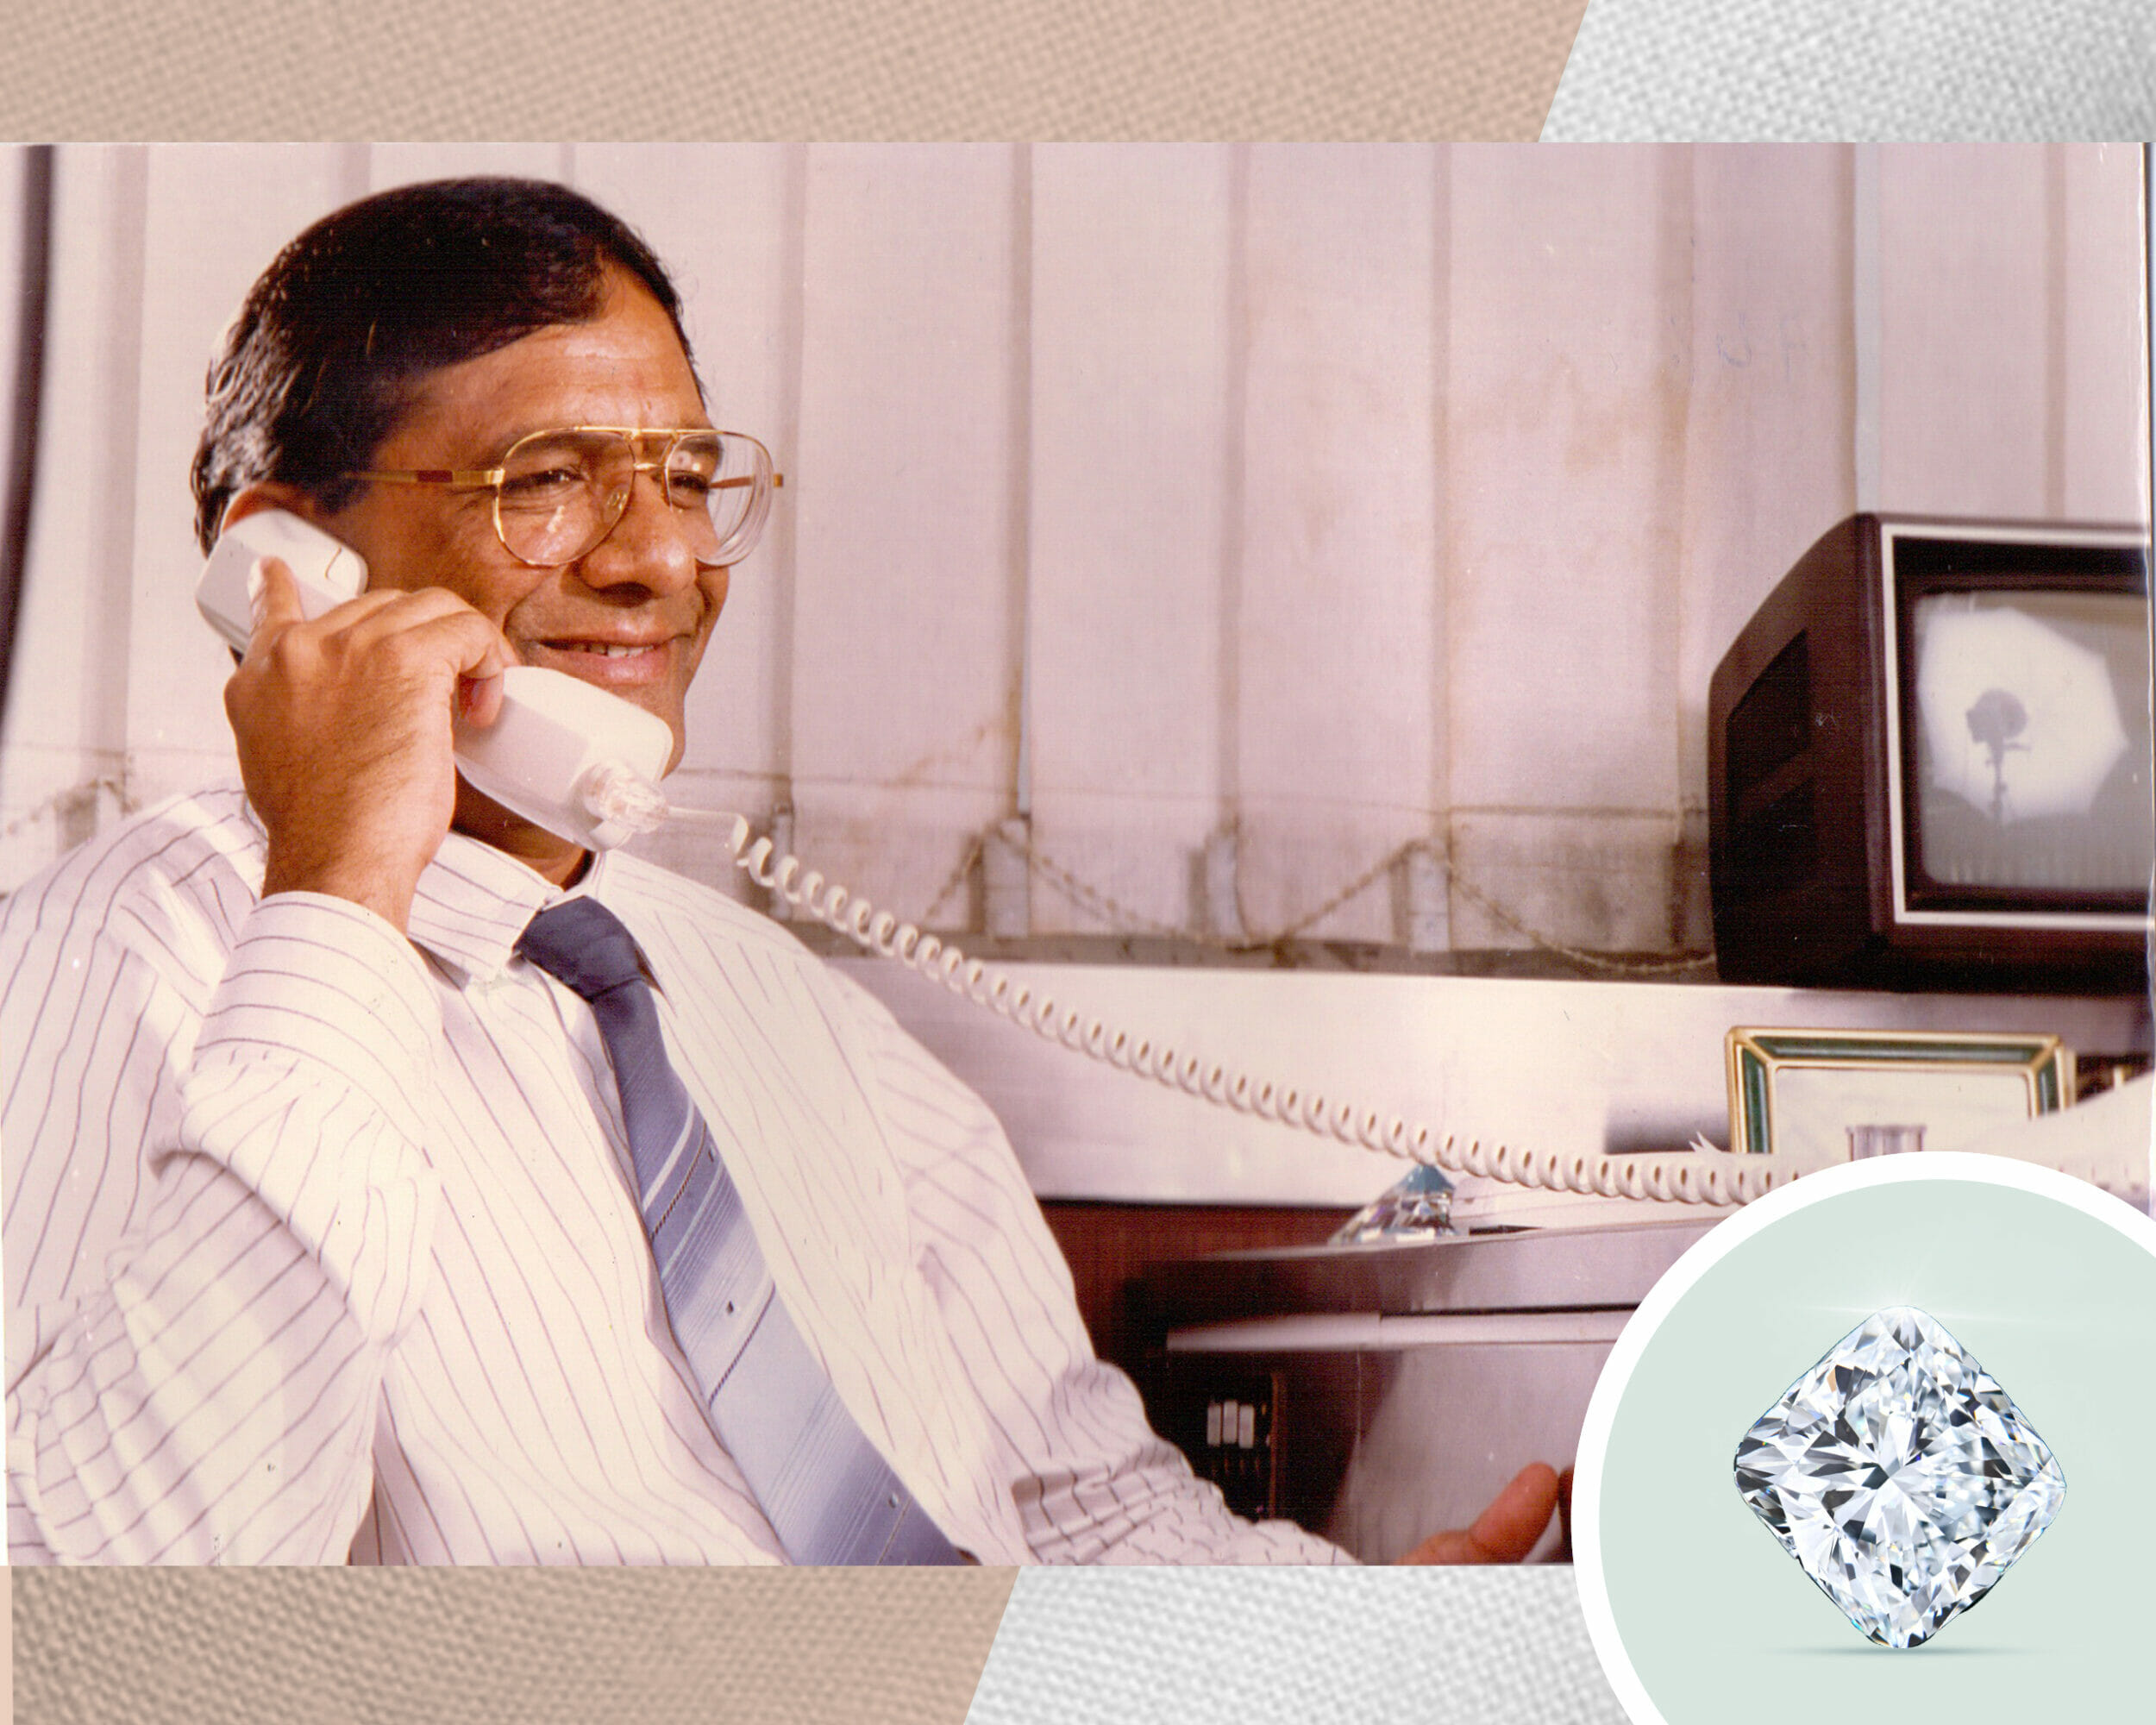 Govind Dholakia, Founder and Chairman at SRK Exports, is regarded by many in the industry as a living legend.